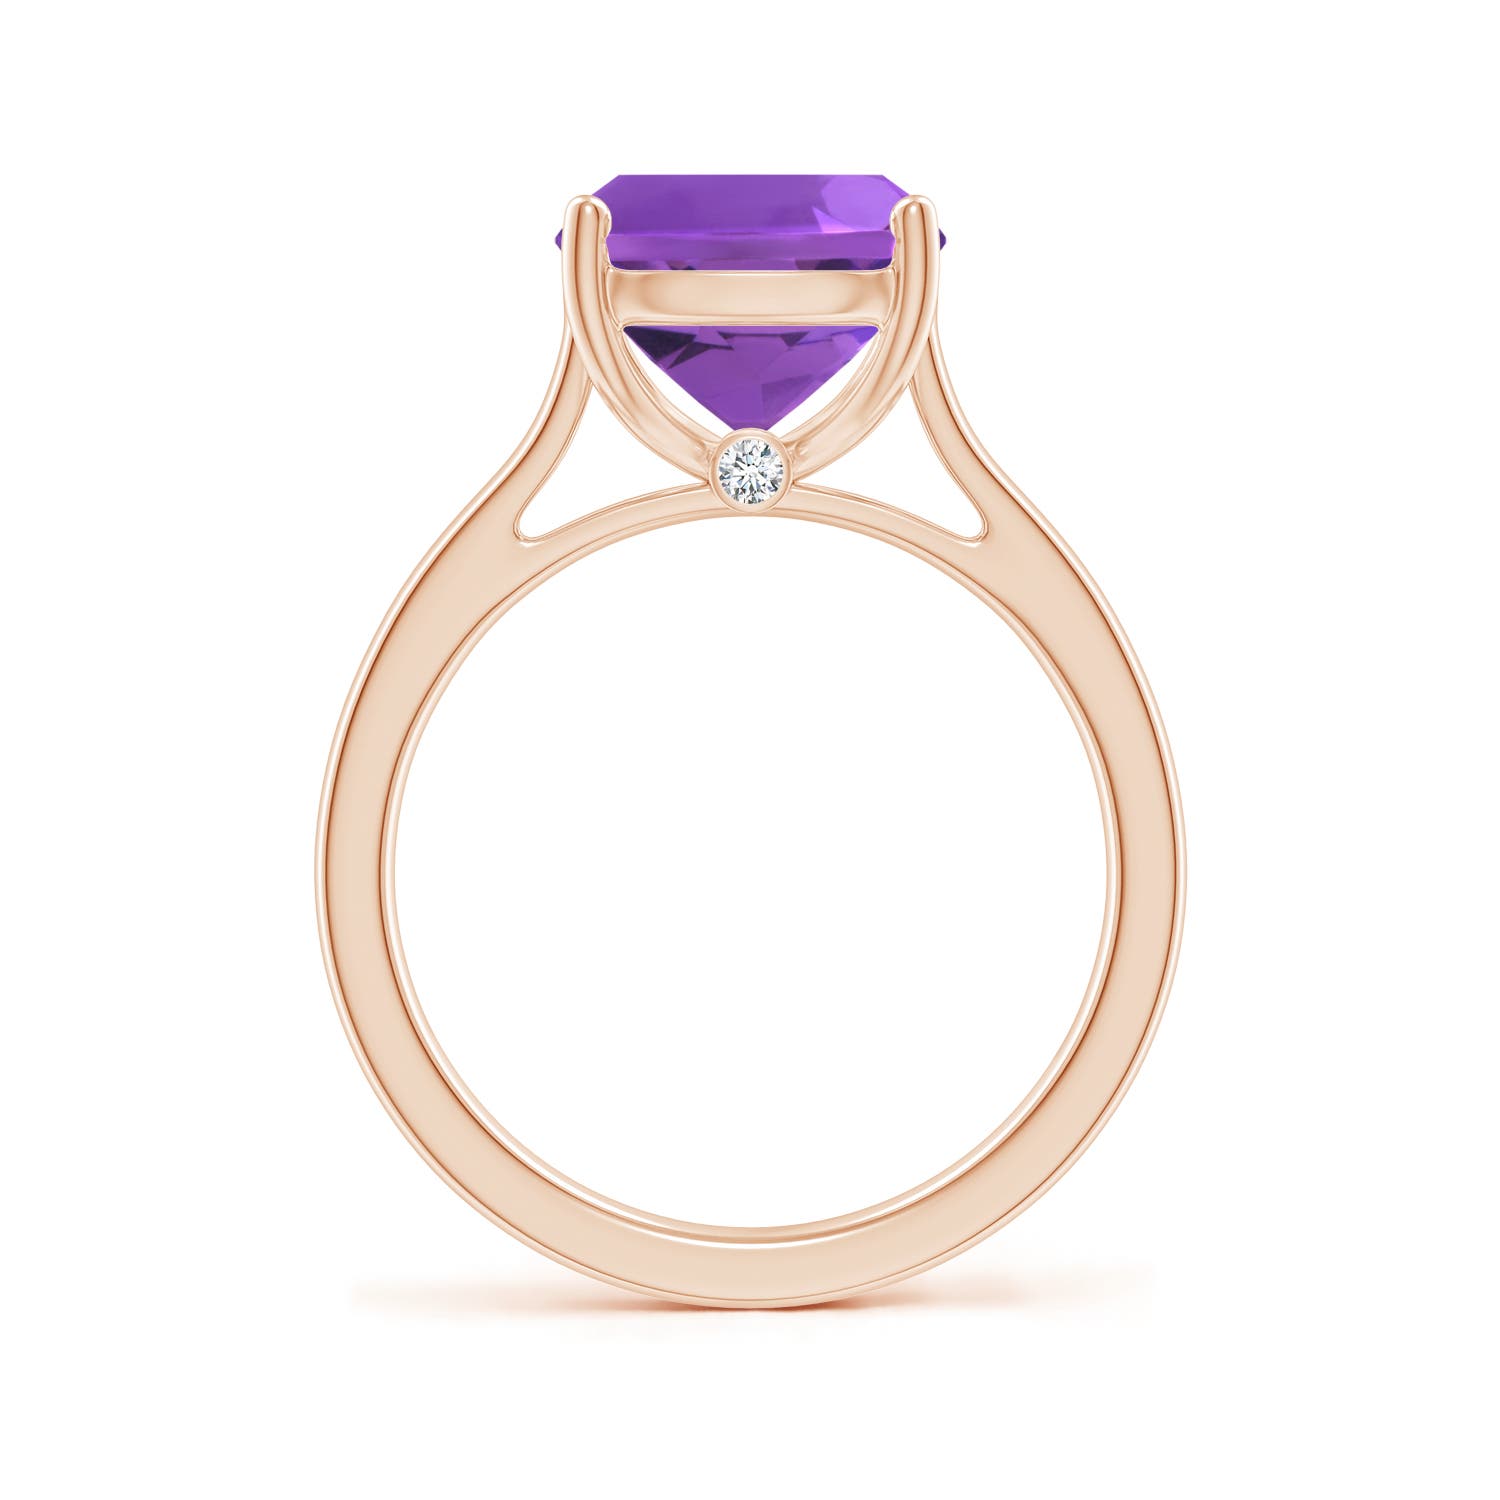 AAA - Amethyst / 3.53 CT / 14 KT Rose Gold